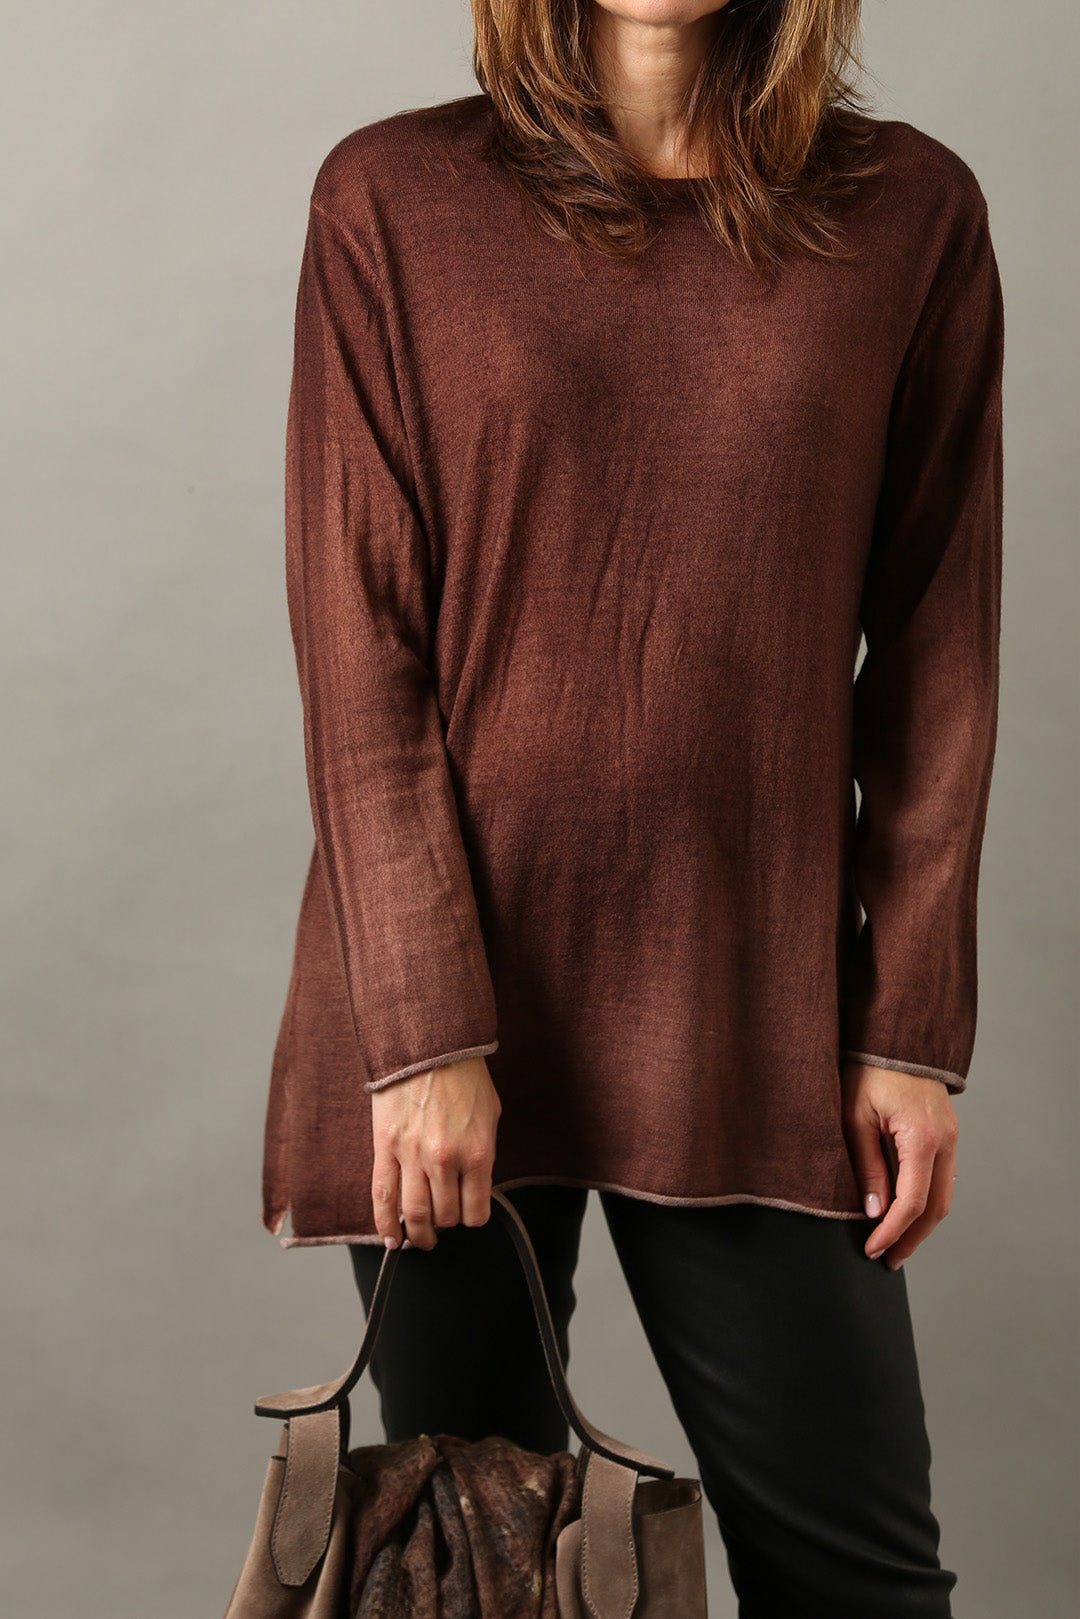 MARIANA IN HAND-DYED LIGHTWEIGHT CASHMERE RICH BROWN - Jarbo